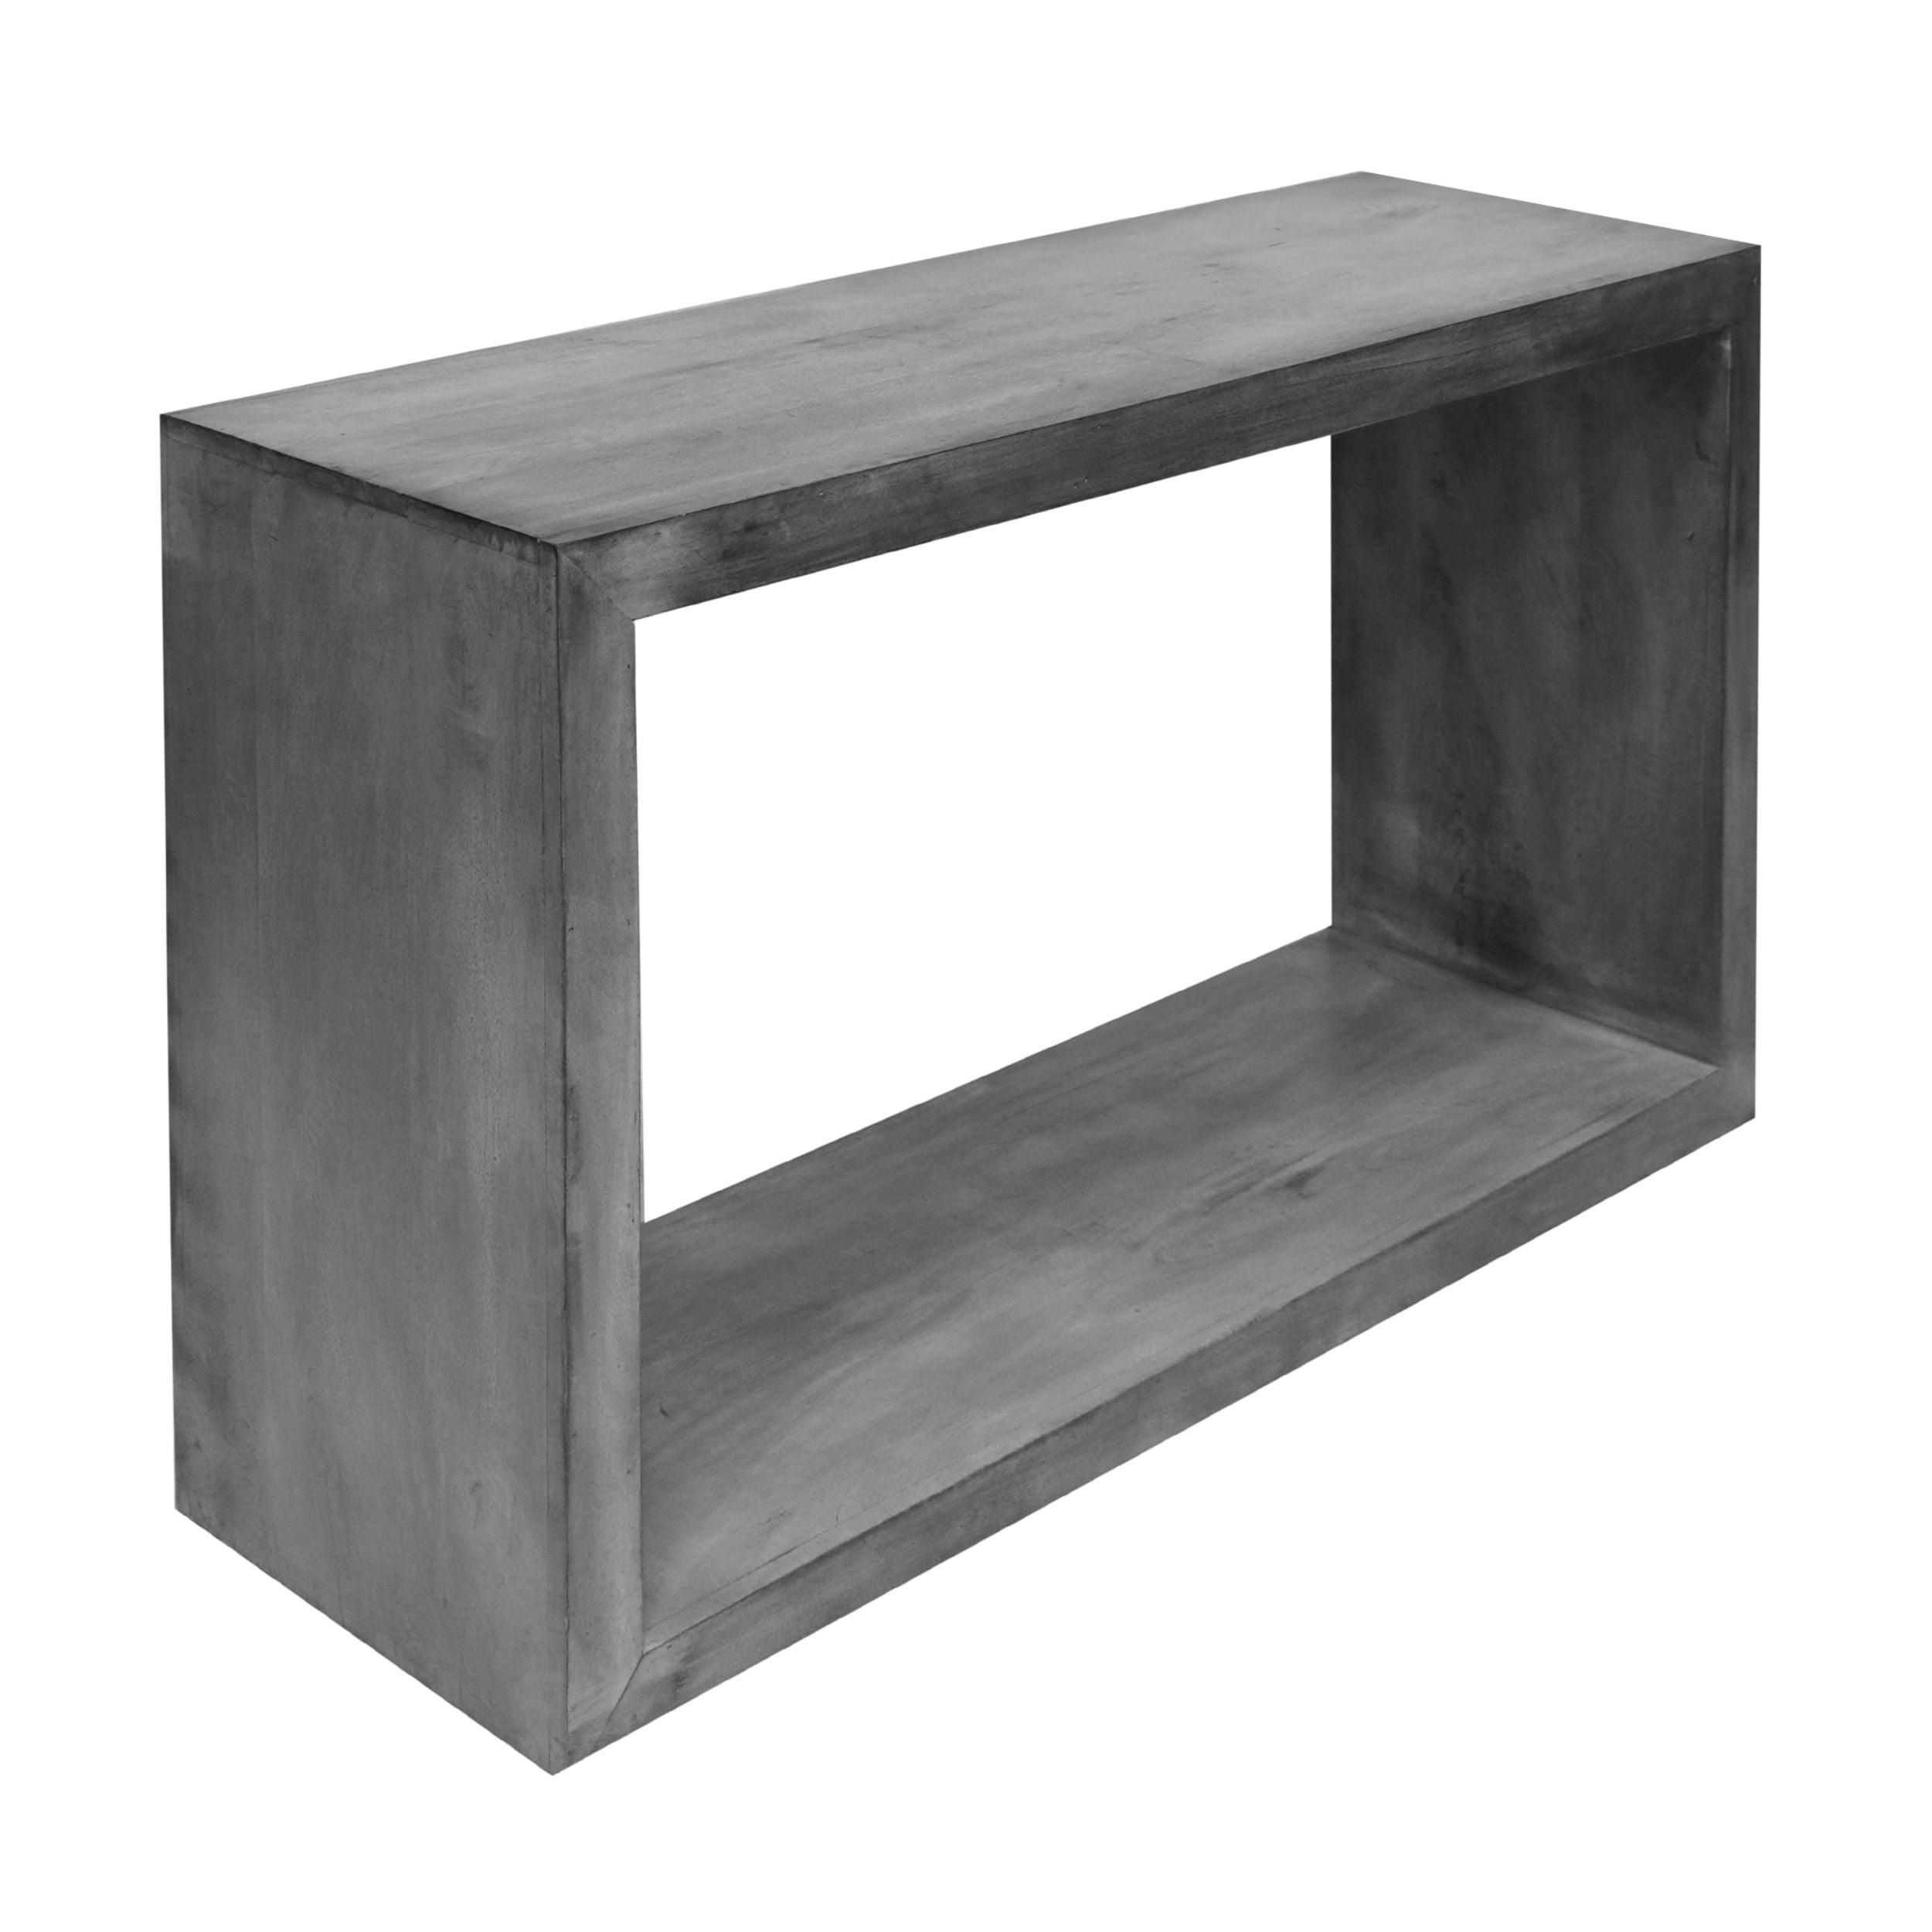 Retro Charcoal Gray 52" Mango Wood Console Table with Open Shelf